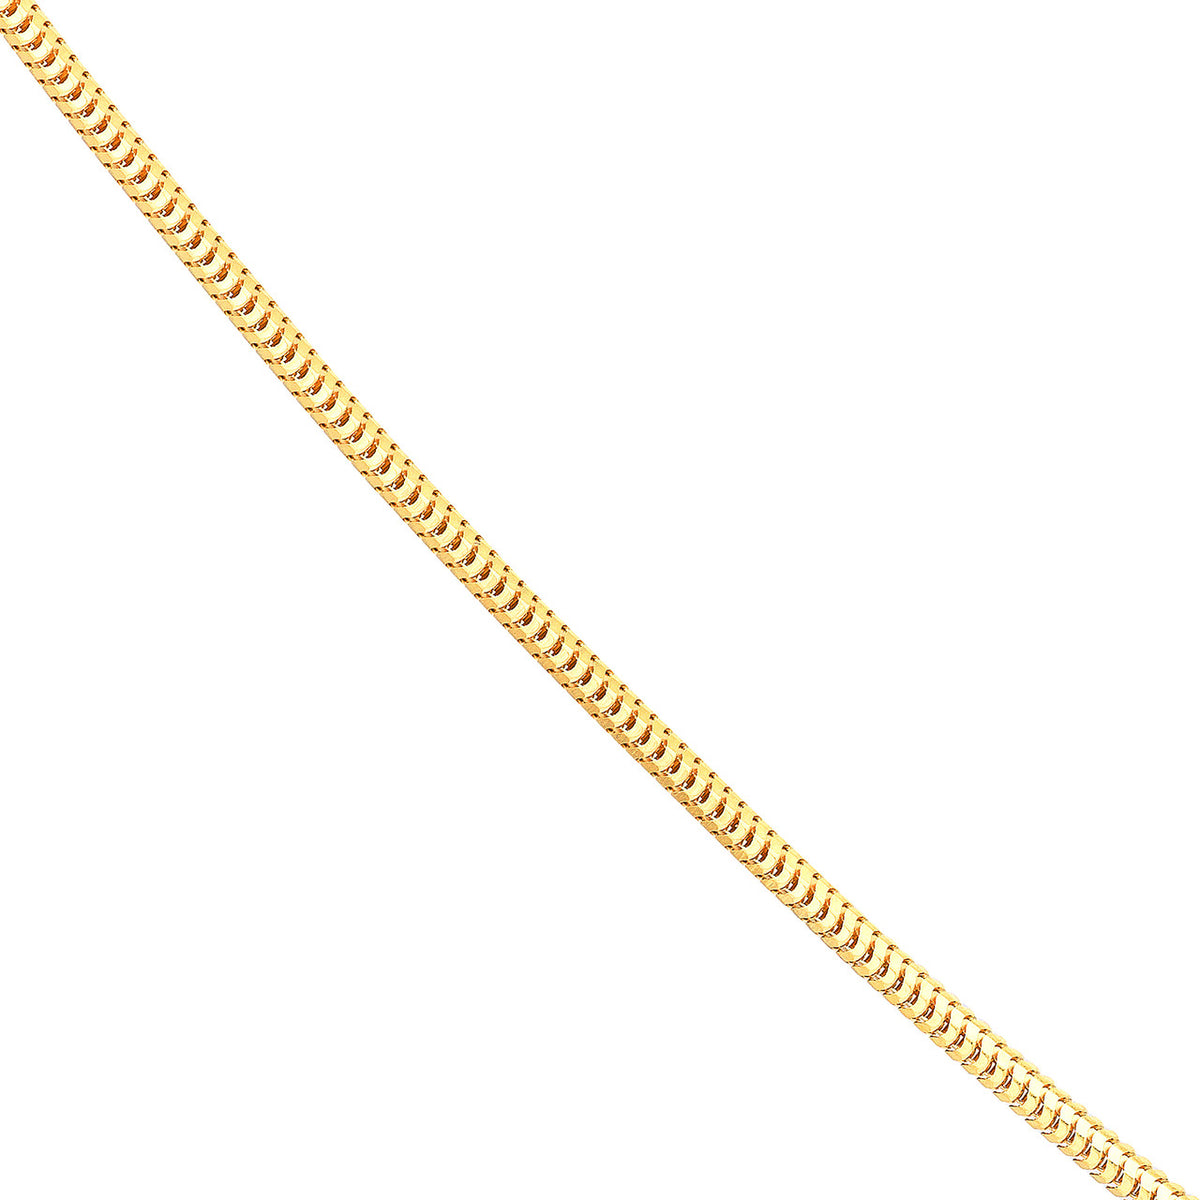 14K Yellow Gold or White Gold or Rose Gold 1.4mm Snake Chain Necklace with Lobster Lock